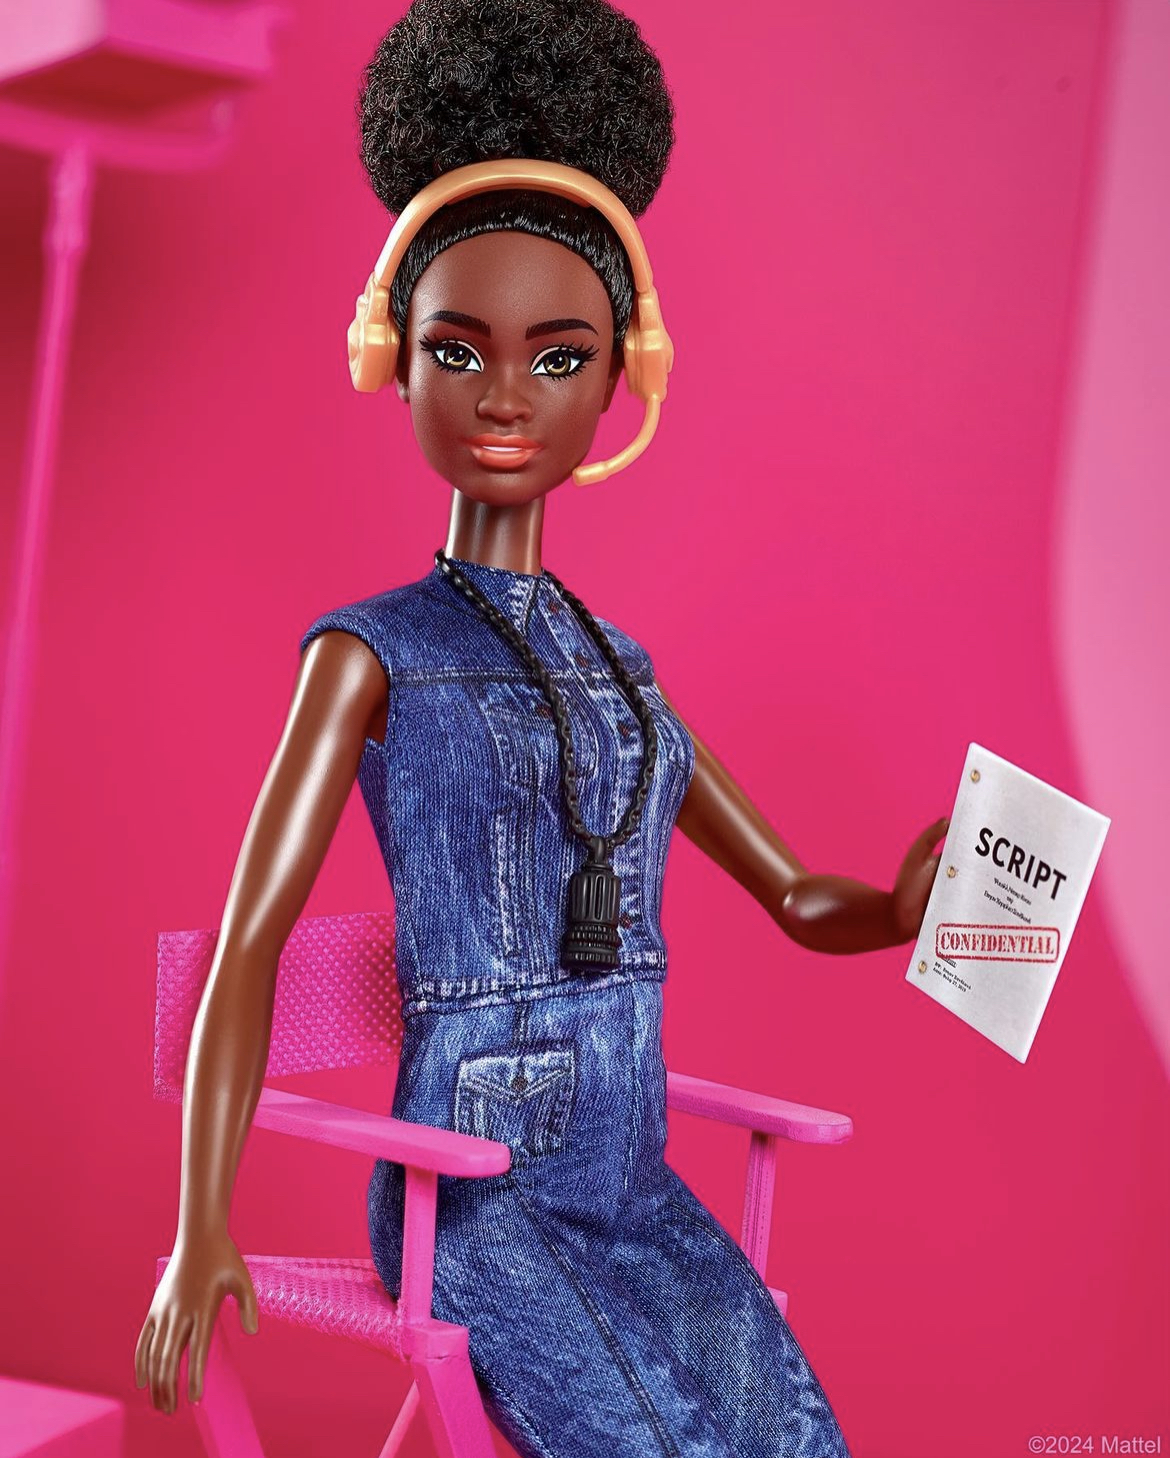 Barbie Launches Women in Film Collection